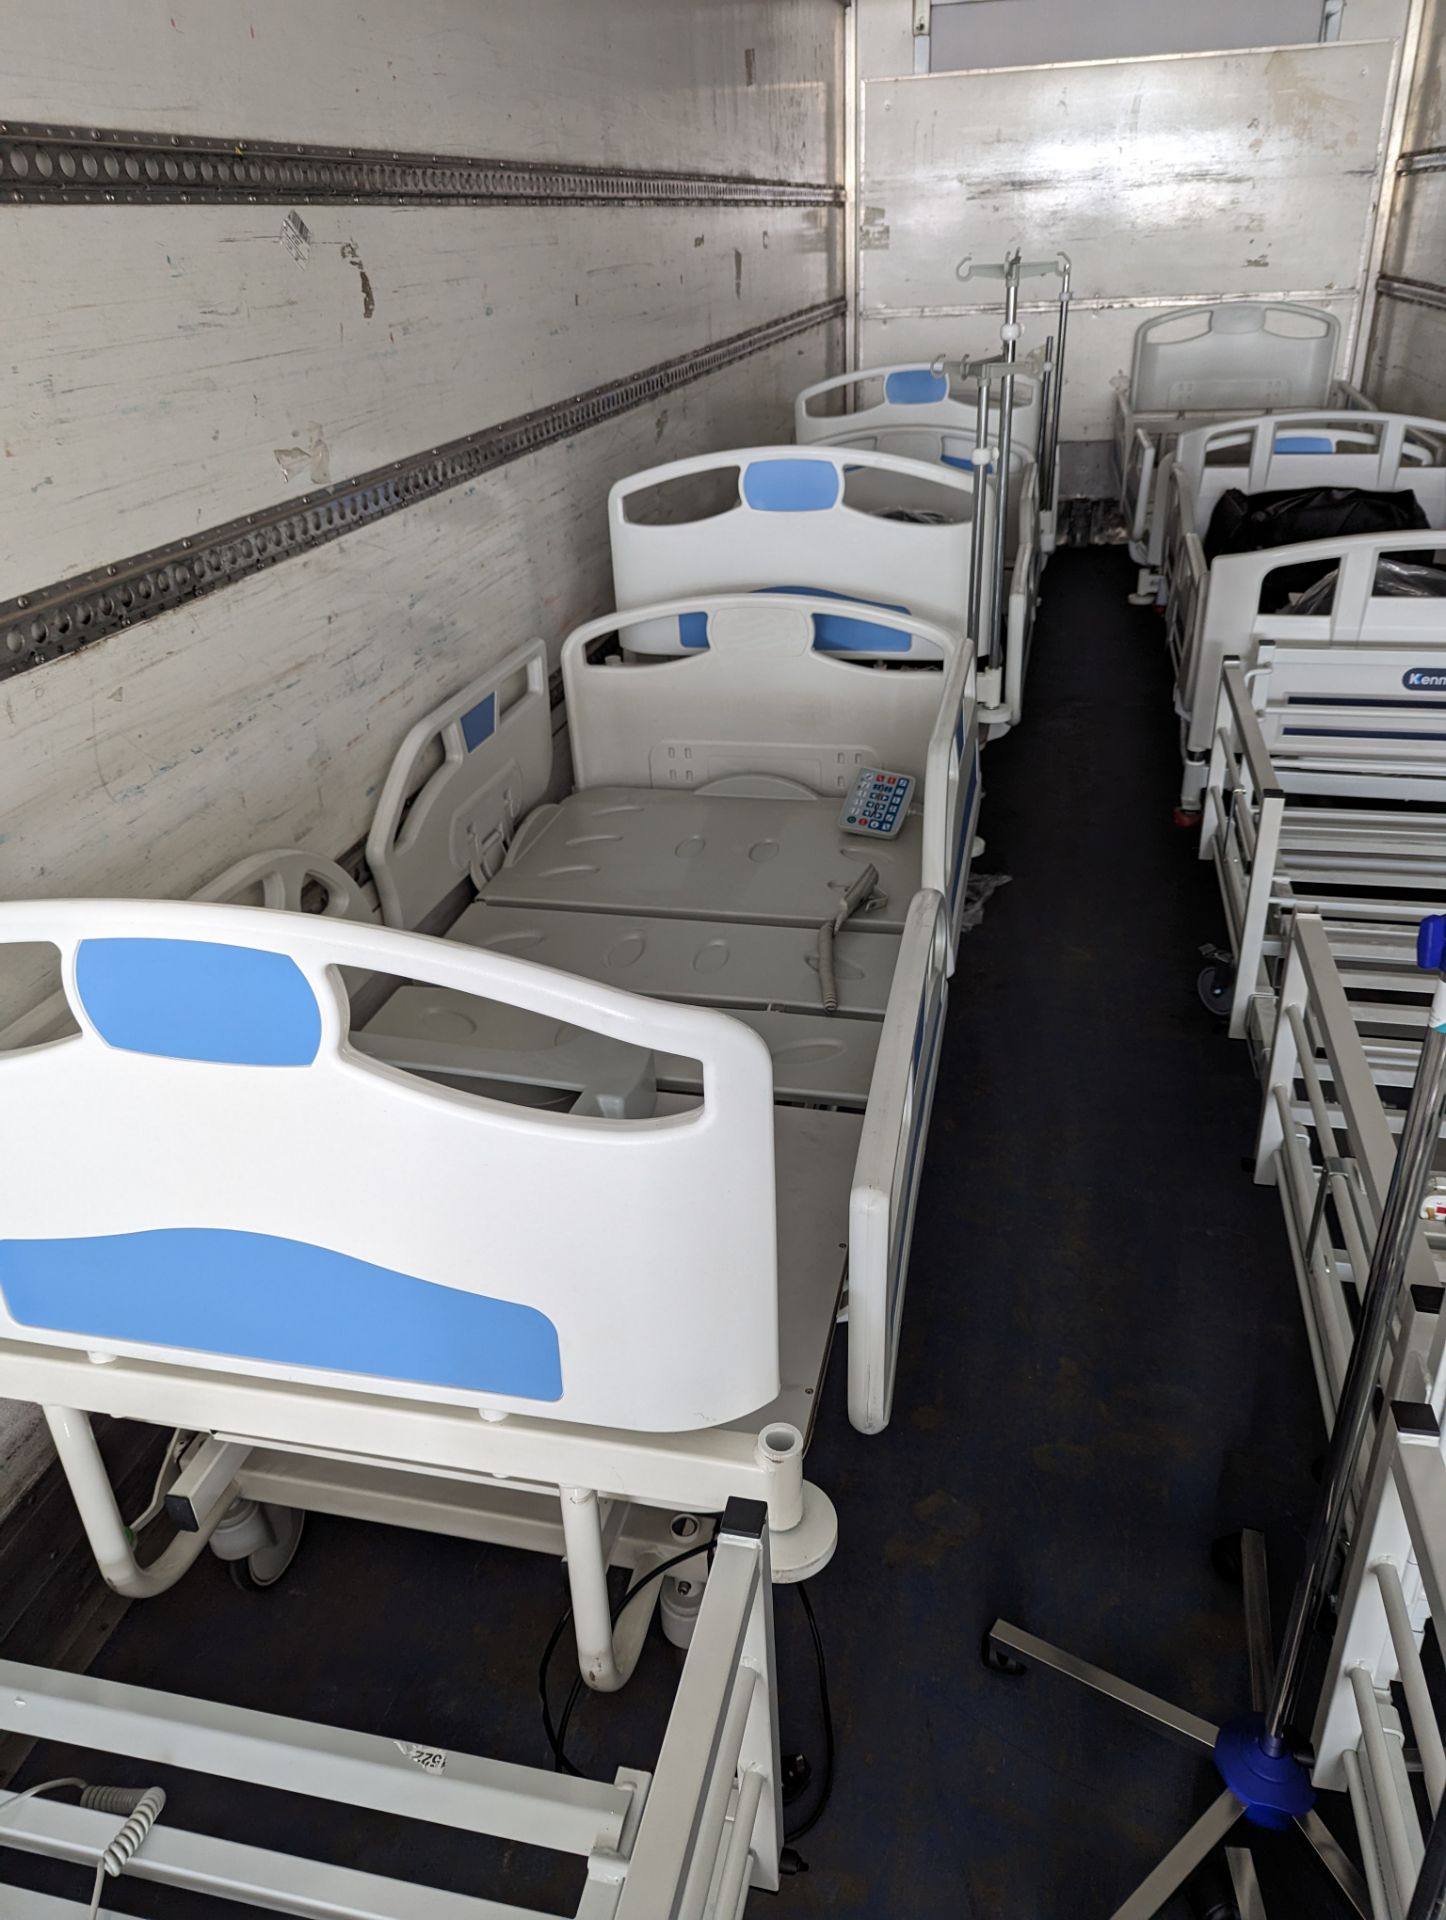 KENMARK GUESS 301 ELECTRIC FULLY ADJUSTABLE HOSPITAL BEDS WITH MATTRESSES - Image 3 of 5